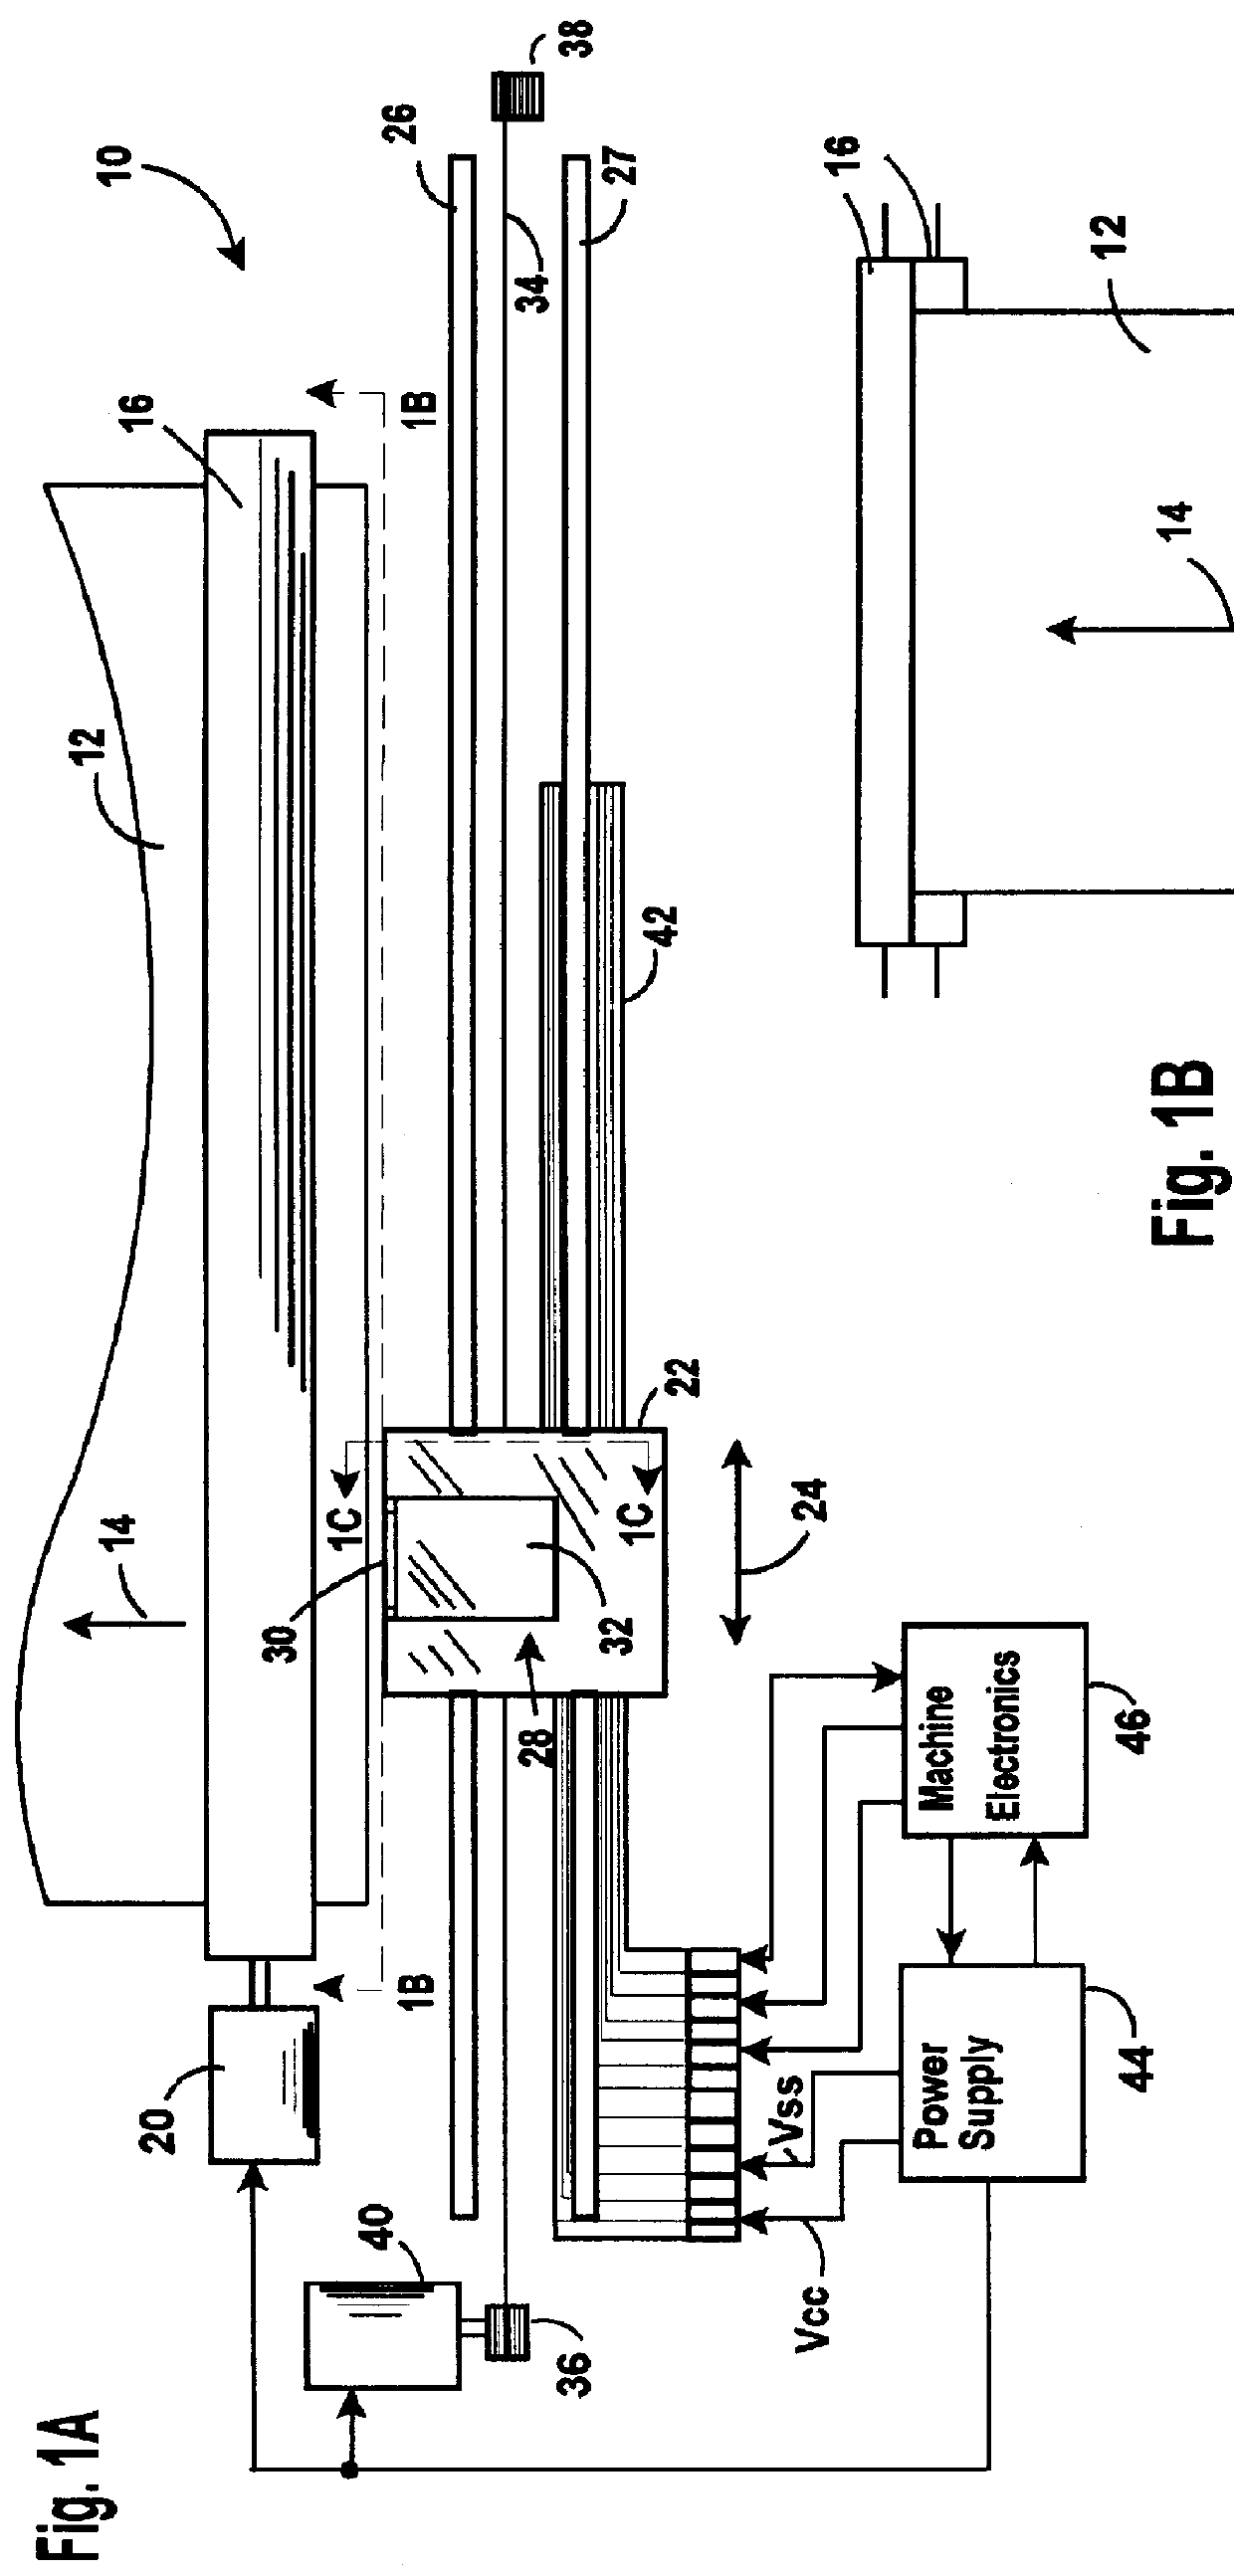 Method and apparatus for inhibiting electrically induced ink build-up on flexible, integrated circuit connecting leads, for thermal ink jet printer heads